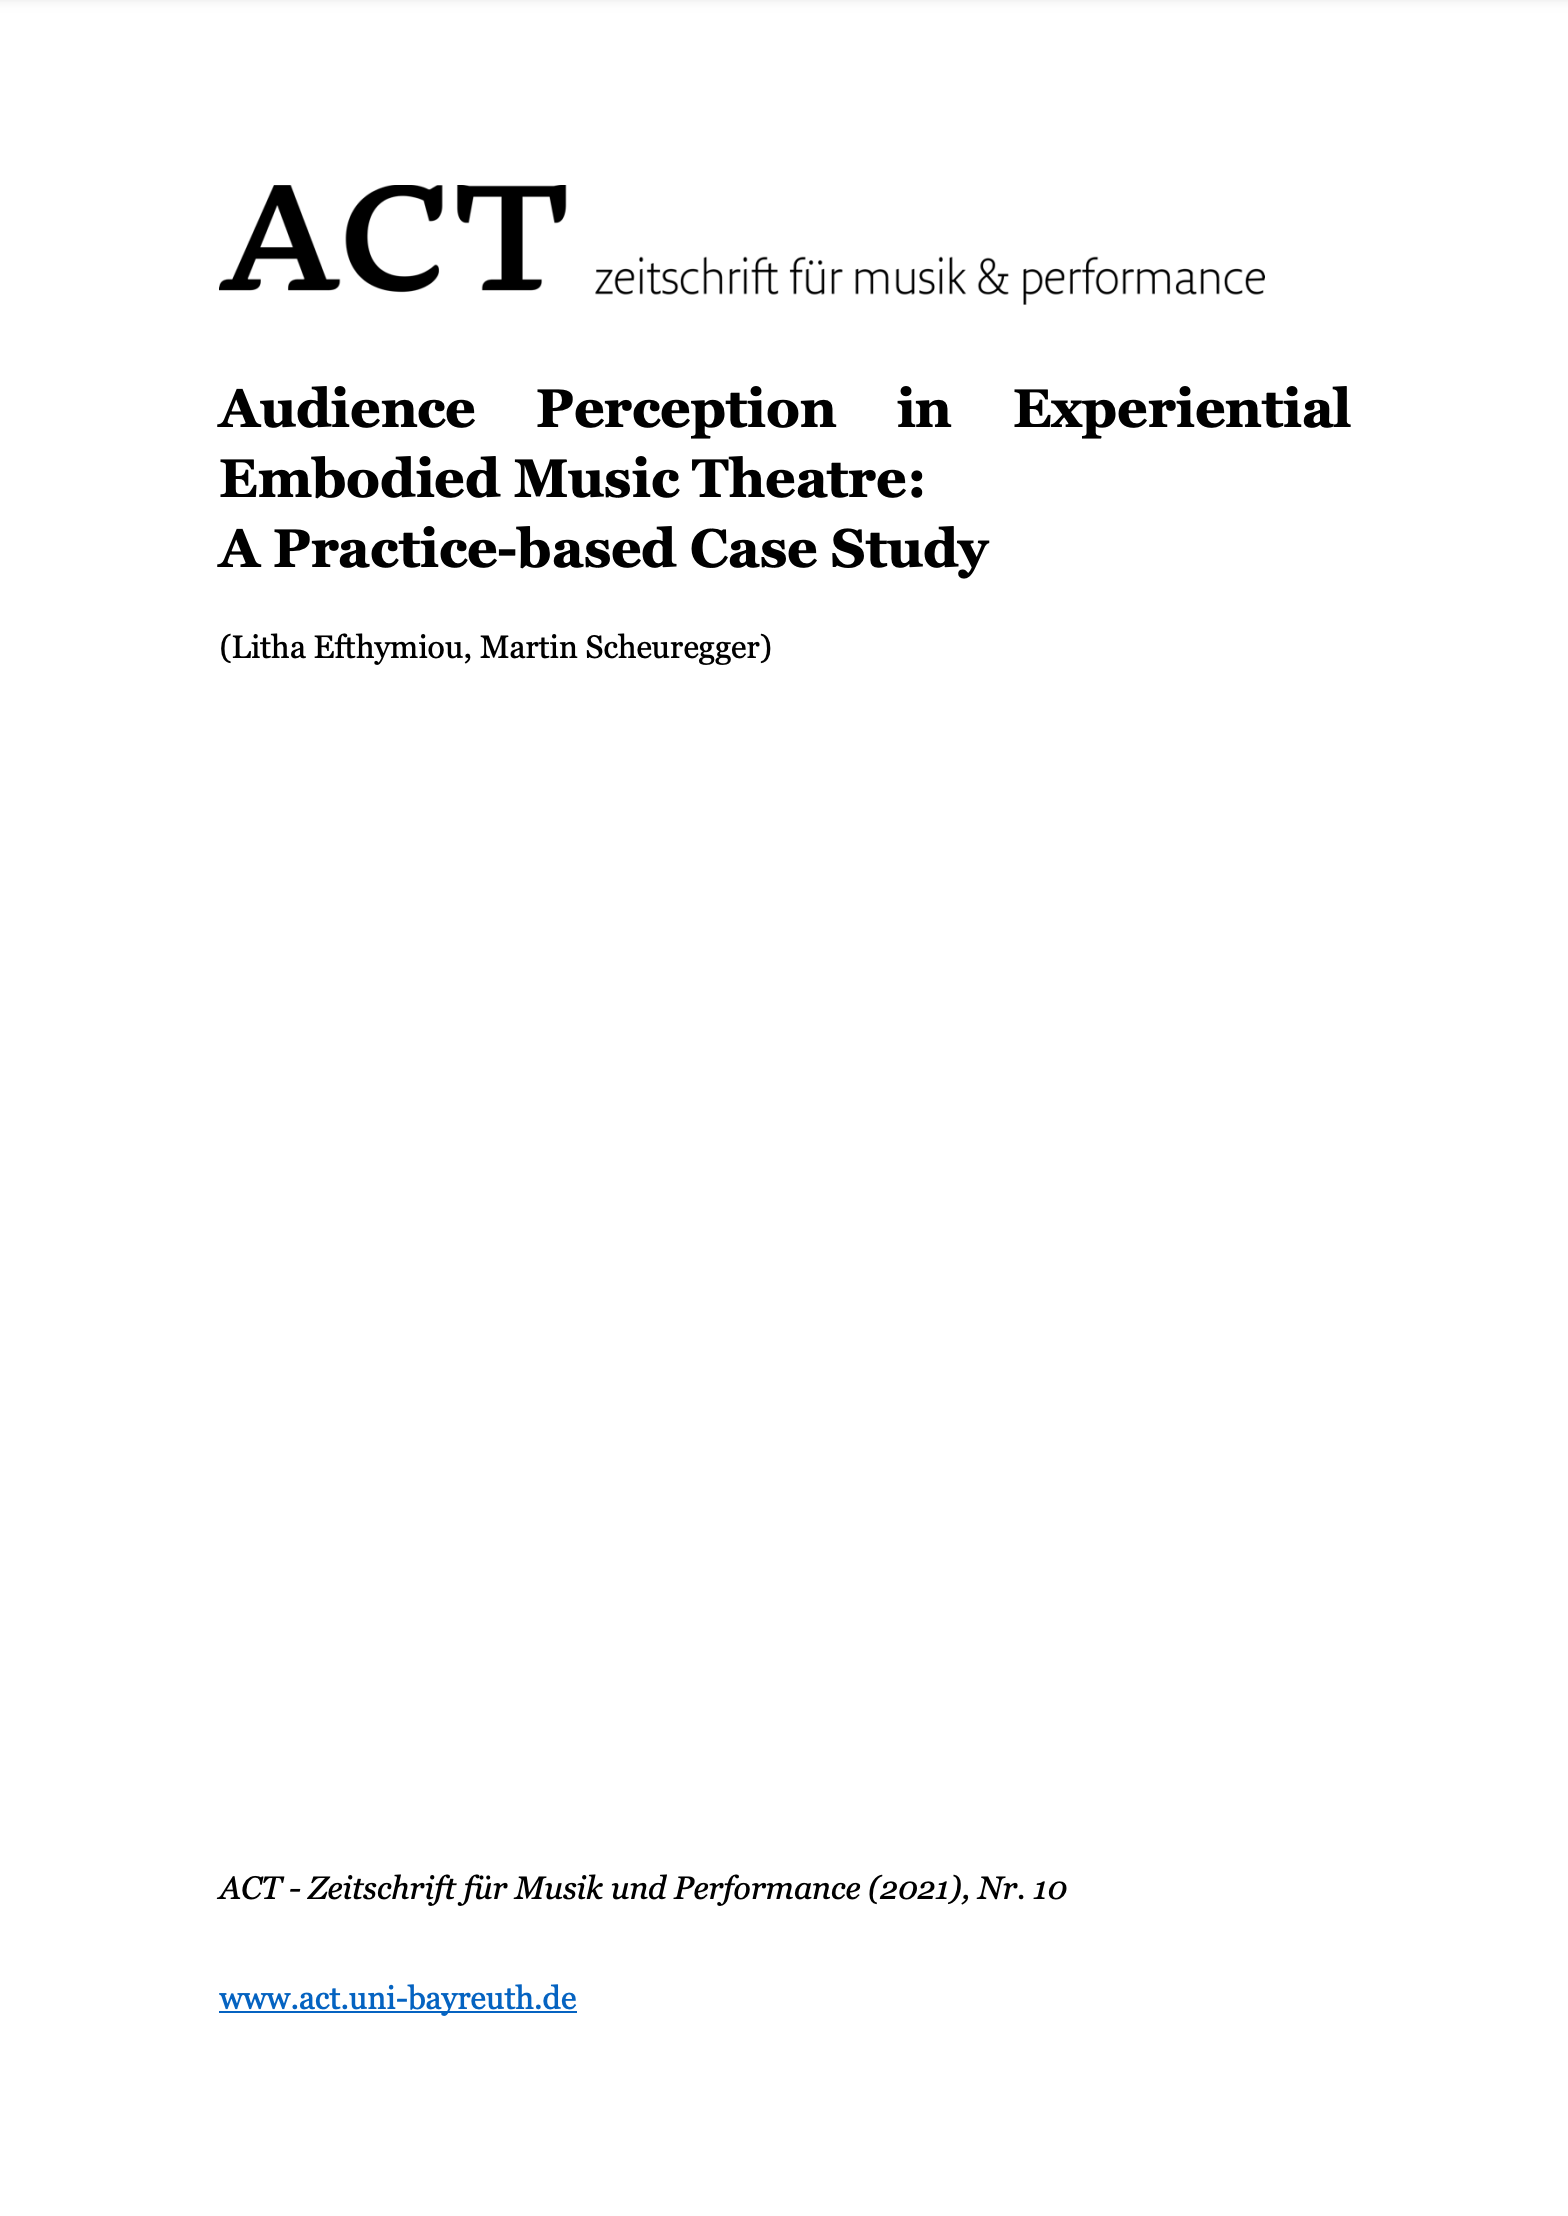 Audience perception in experiential embodied music theatre: a practice-based case study